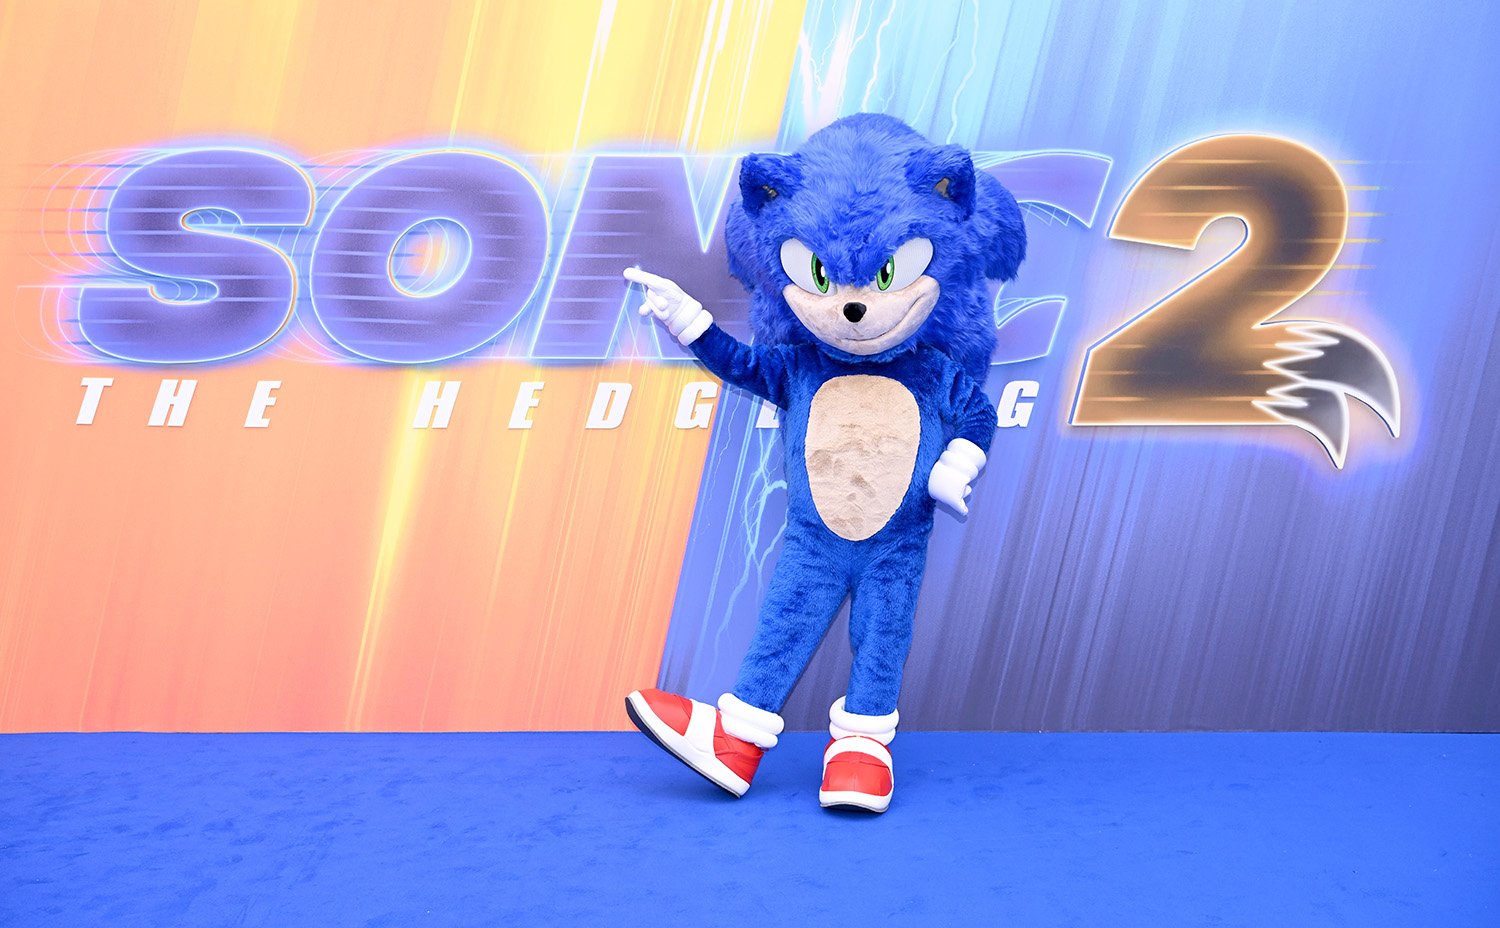 Sonic the Hedgehog attends the Sonic the Hedgehog 2 screening in London.